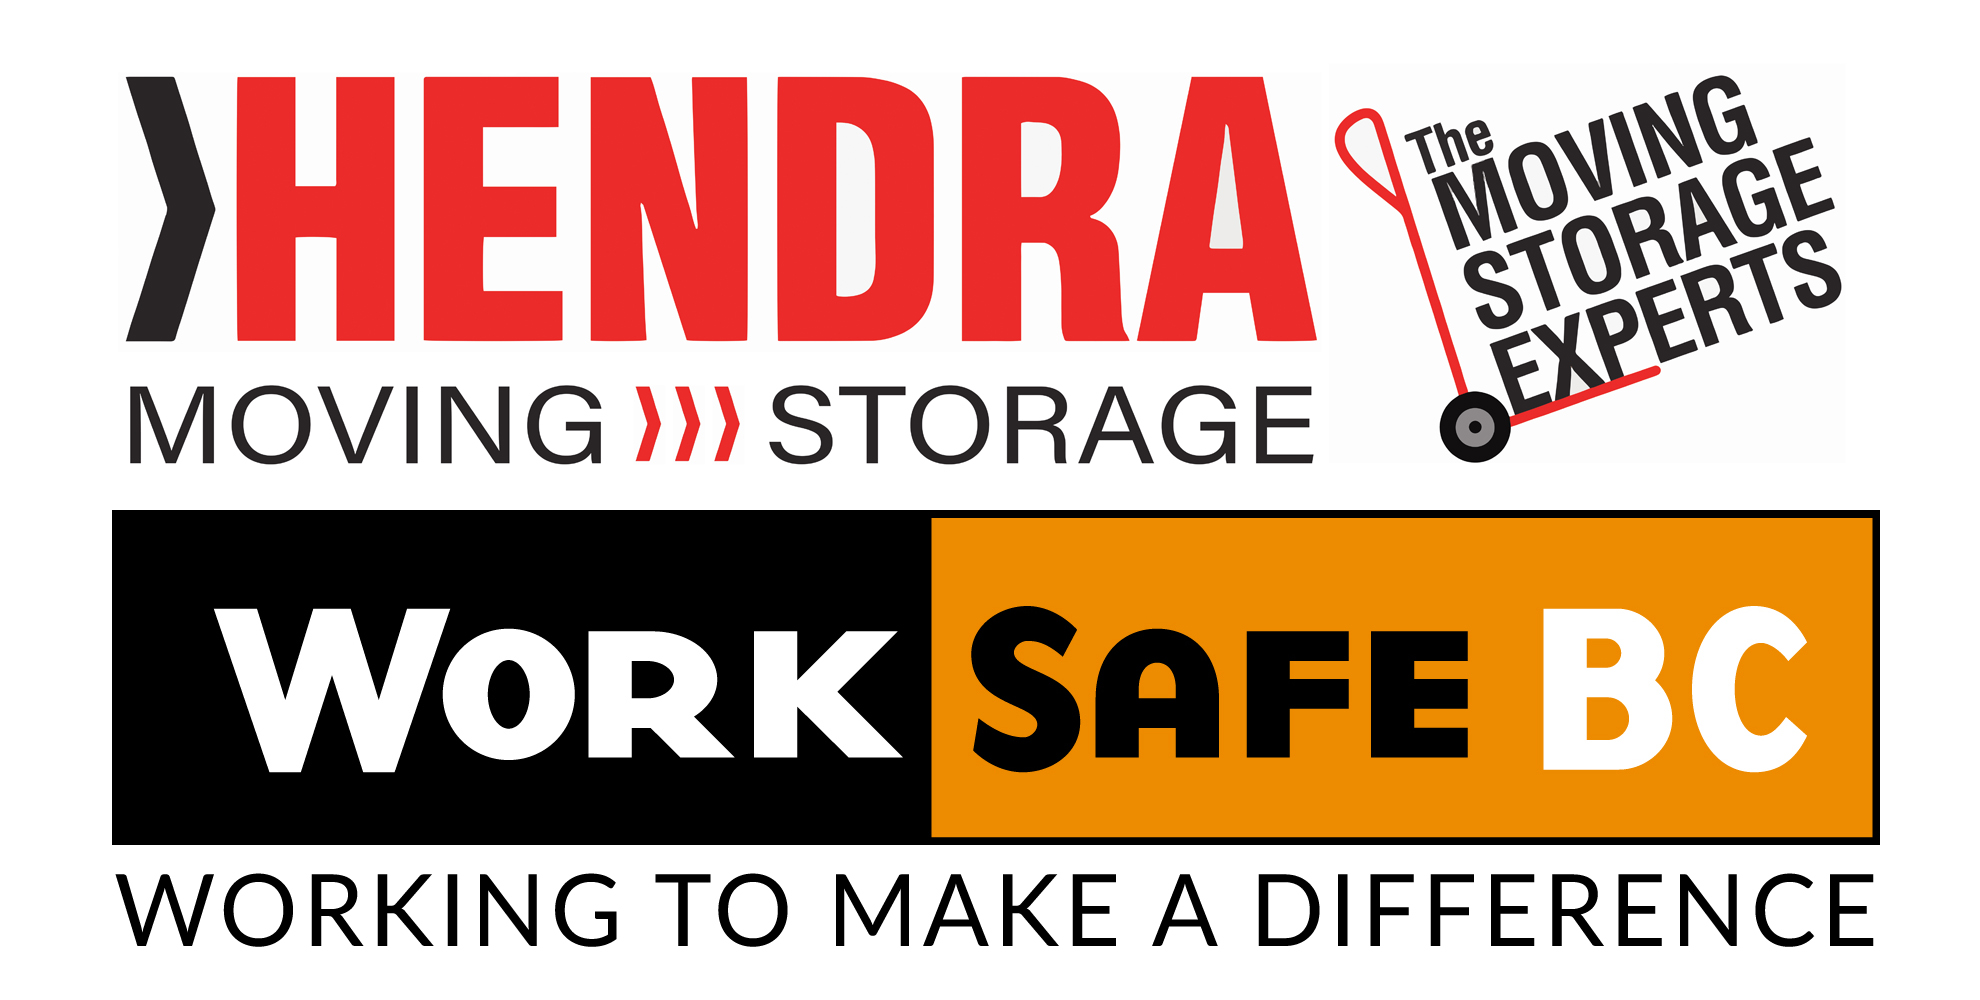 Hendra Moving and Storage insured with WorkSafeBC